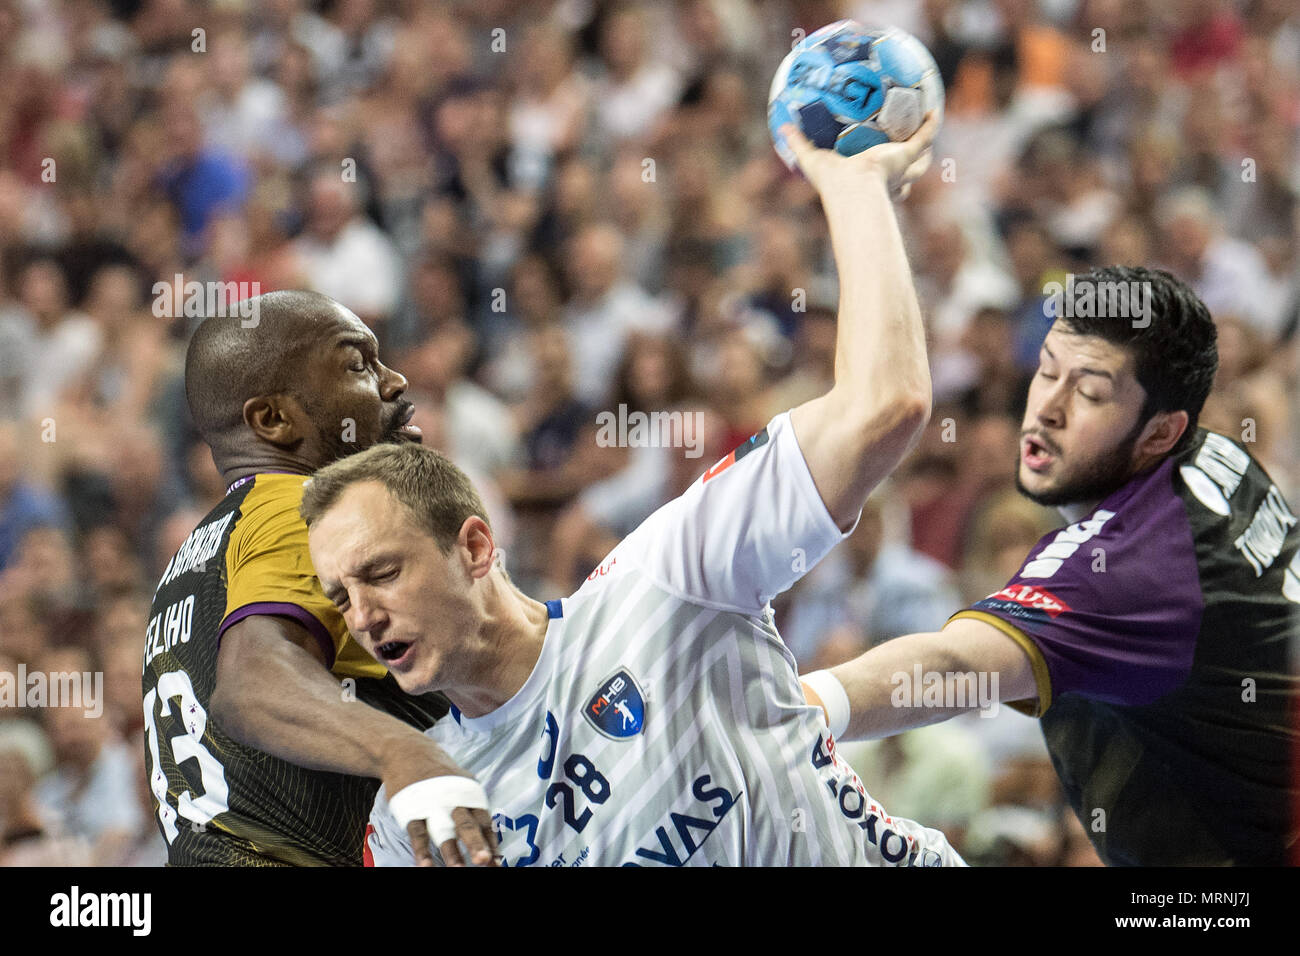 27 May 2018, Germany, Cologne: Handball Champions League final, HBC Nantes vs Montpellier HB at the Lanxess Arena: Rock Feliho (l) of Nantes and Valentin Porte of Montpellier vie for the ball. Photo: Federico Gambarini/dpa Stock Photo